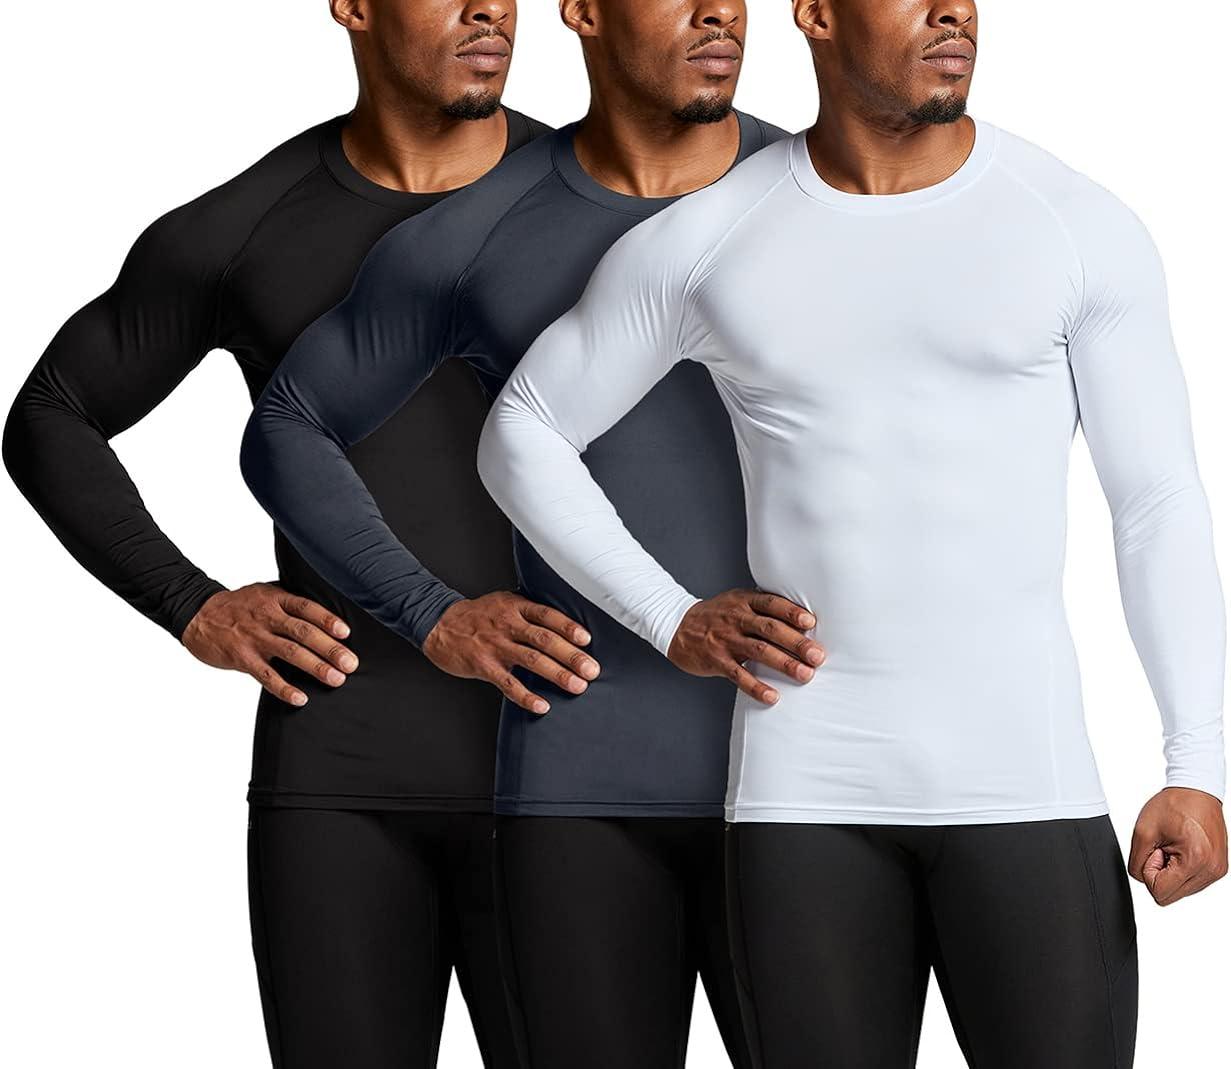  4 Pack Womens Compression Shirt Long Sleeve Performance  Workout Baselayer Athletic Top Sports Gear-Black/Black/White/White Medium